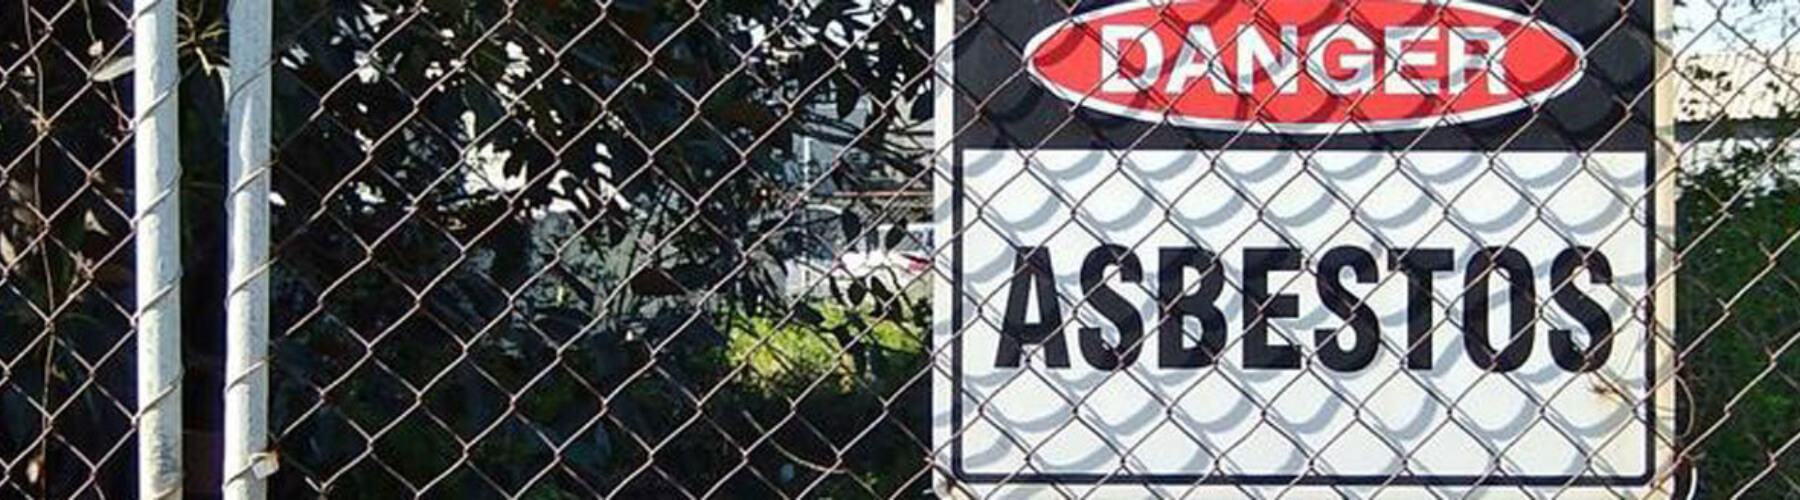 danger asbestos sign on a fence